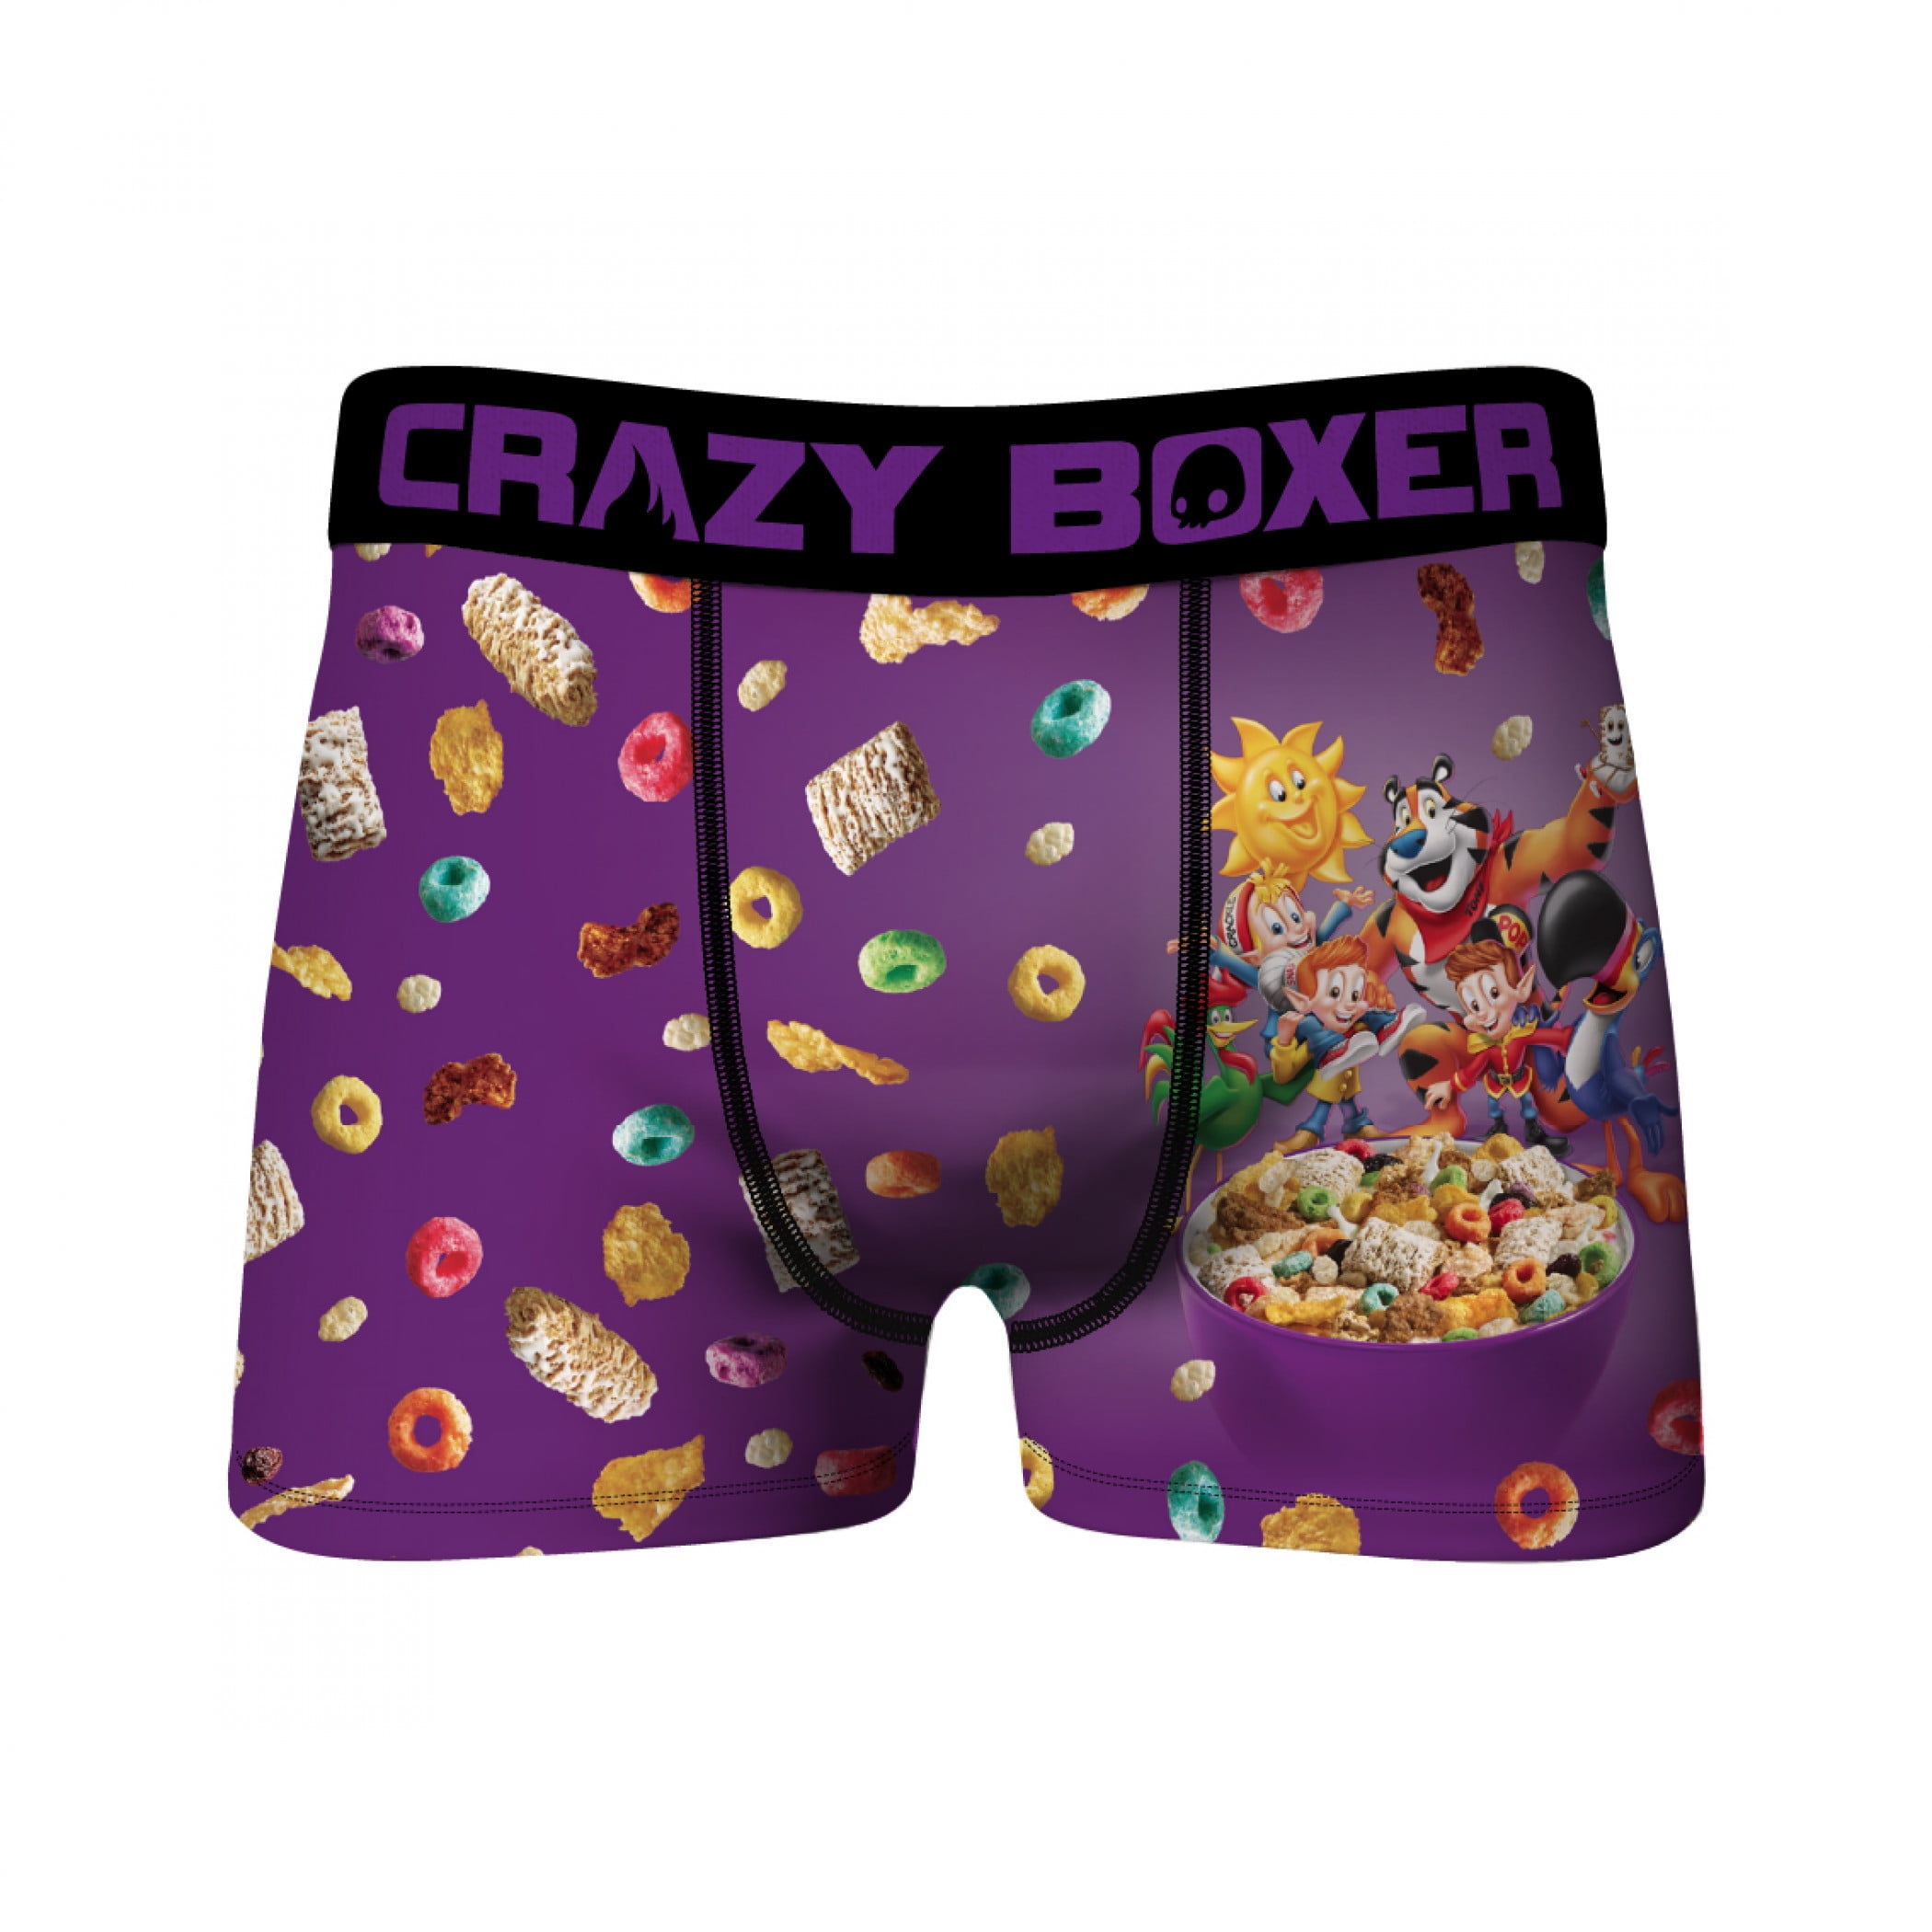 Crazy Boxers Kellogg's Cereal Boxers Variety Boxer Briefs